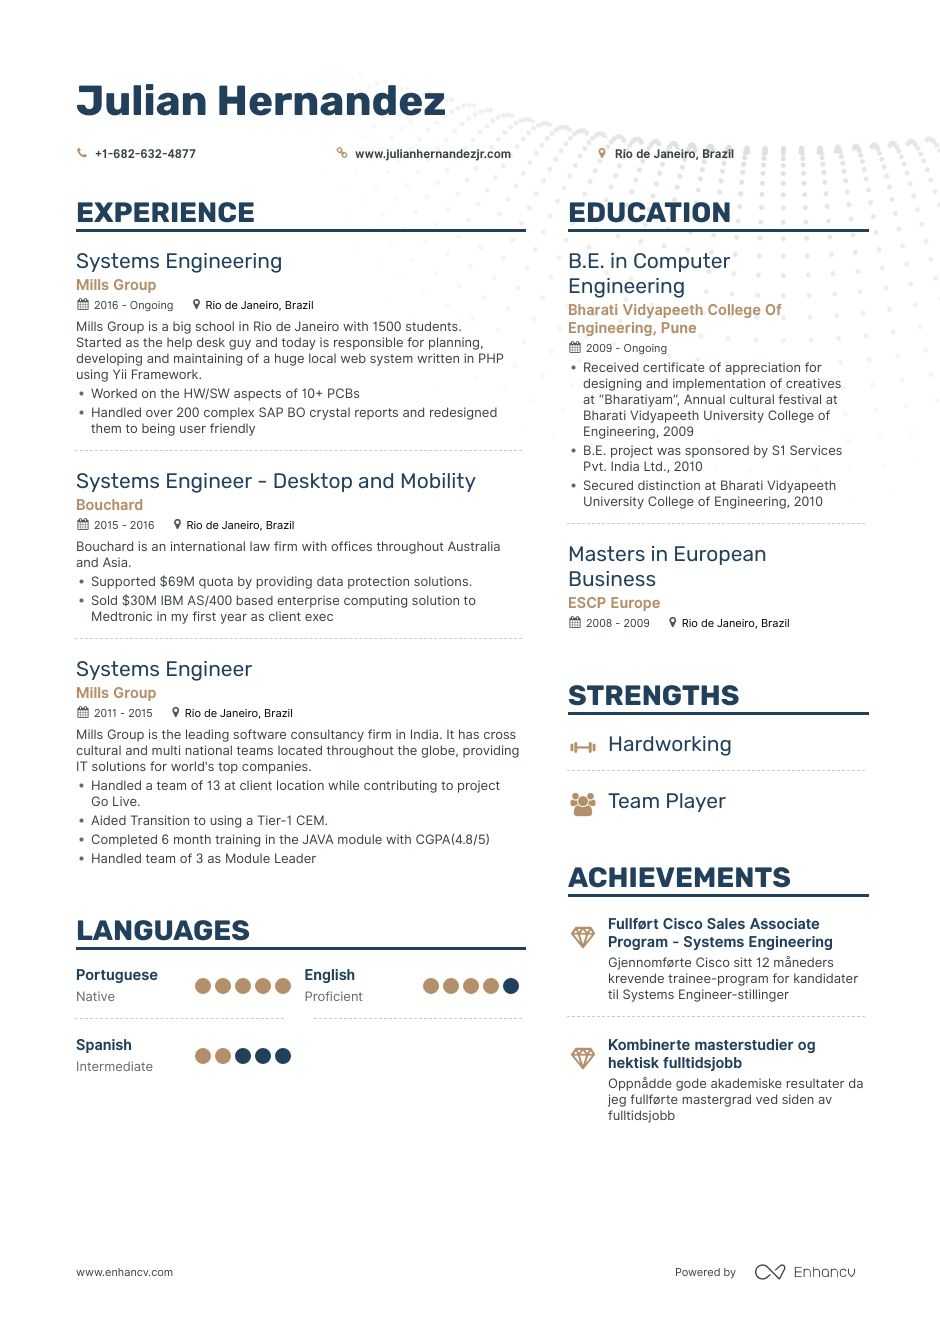 Systems Engineer Resume Examples Pro Tips Featured Enhancv